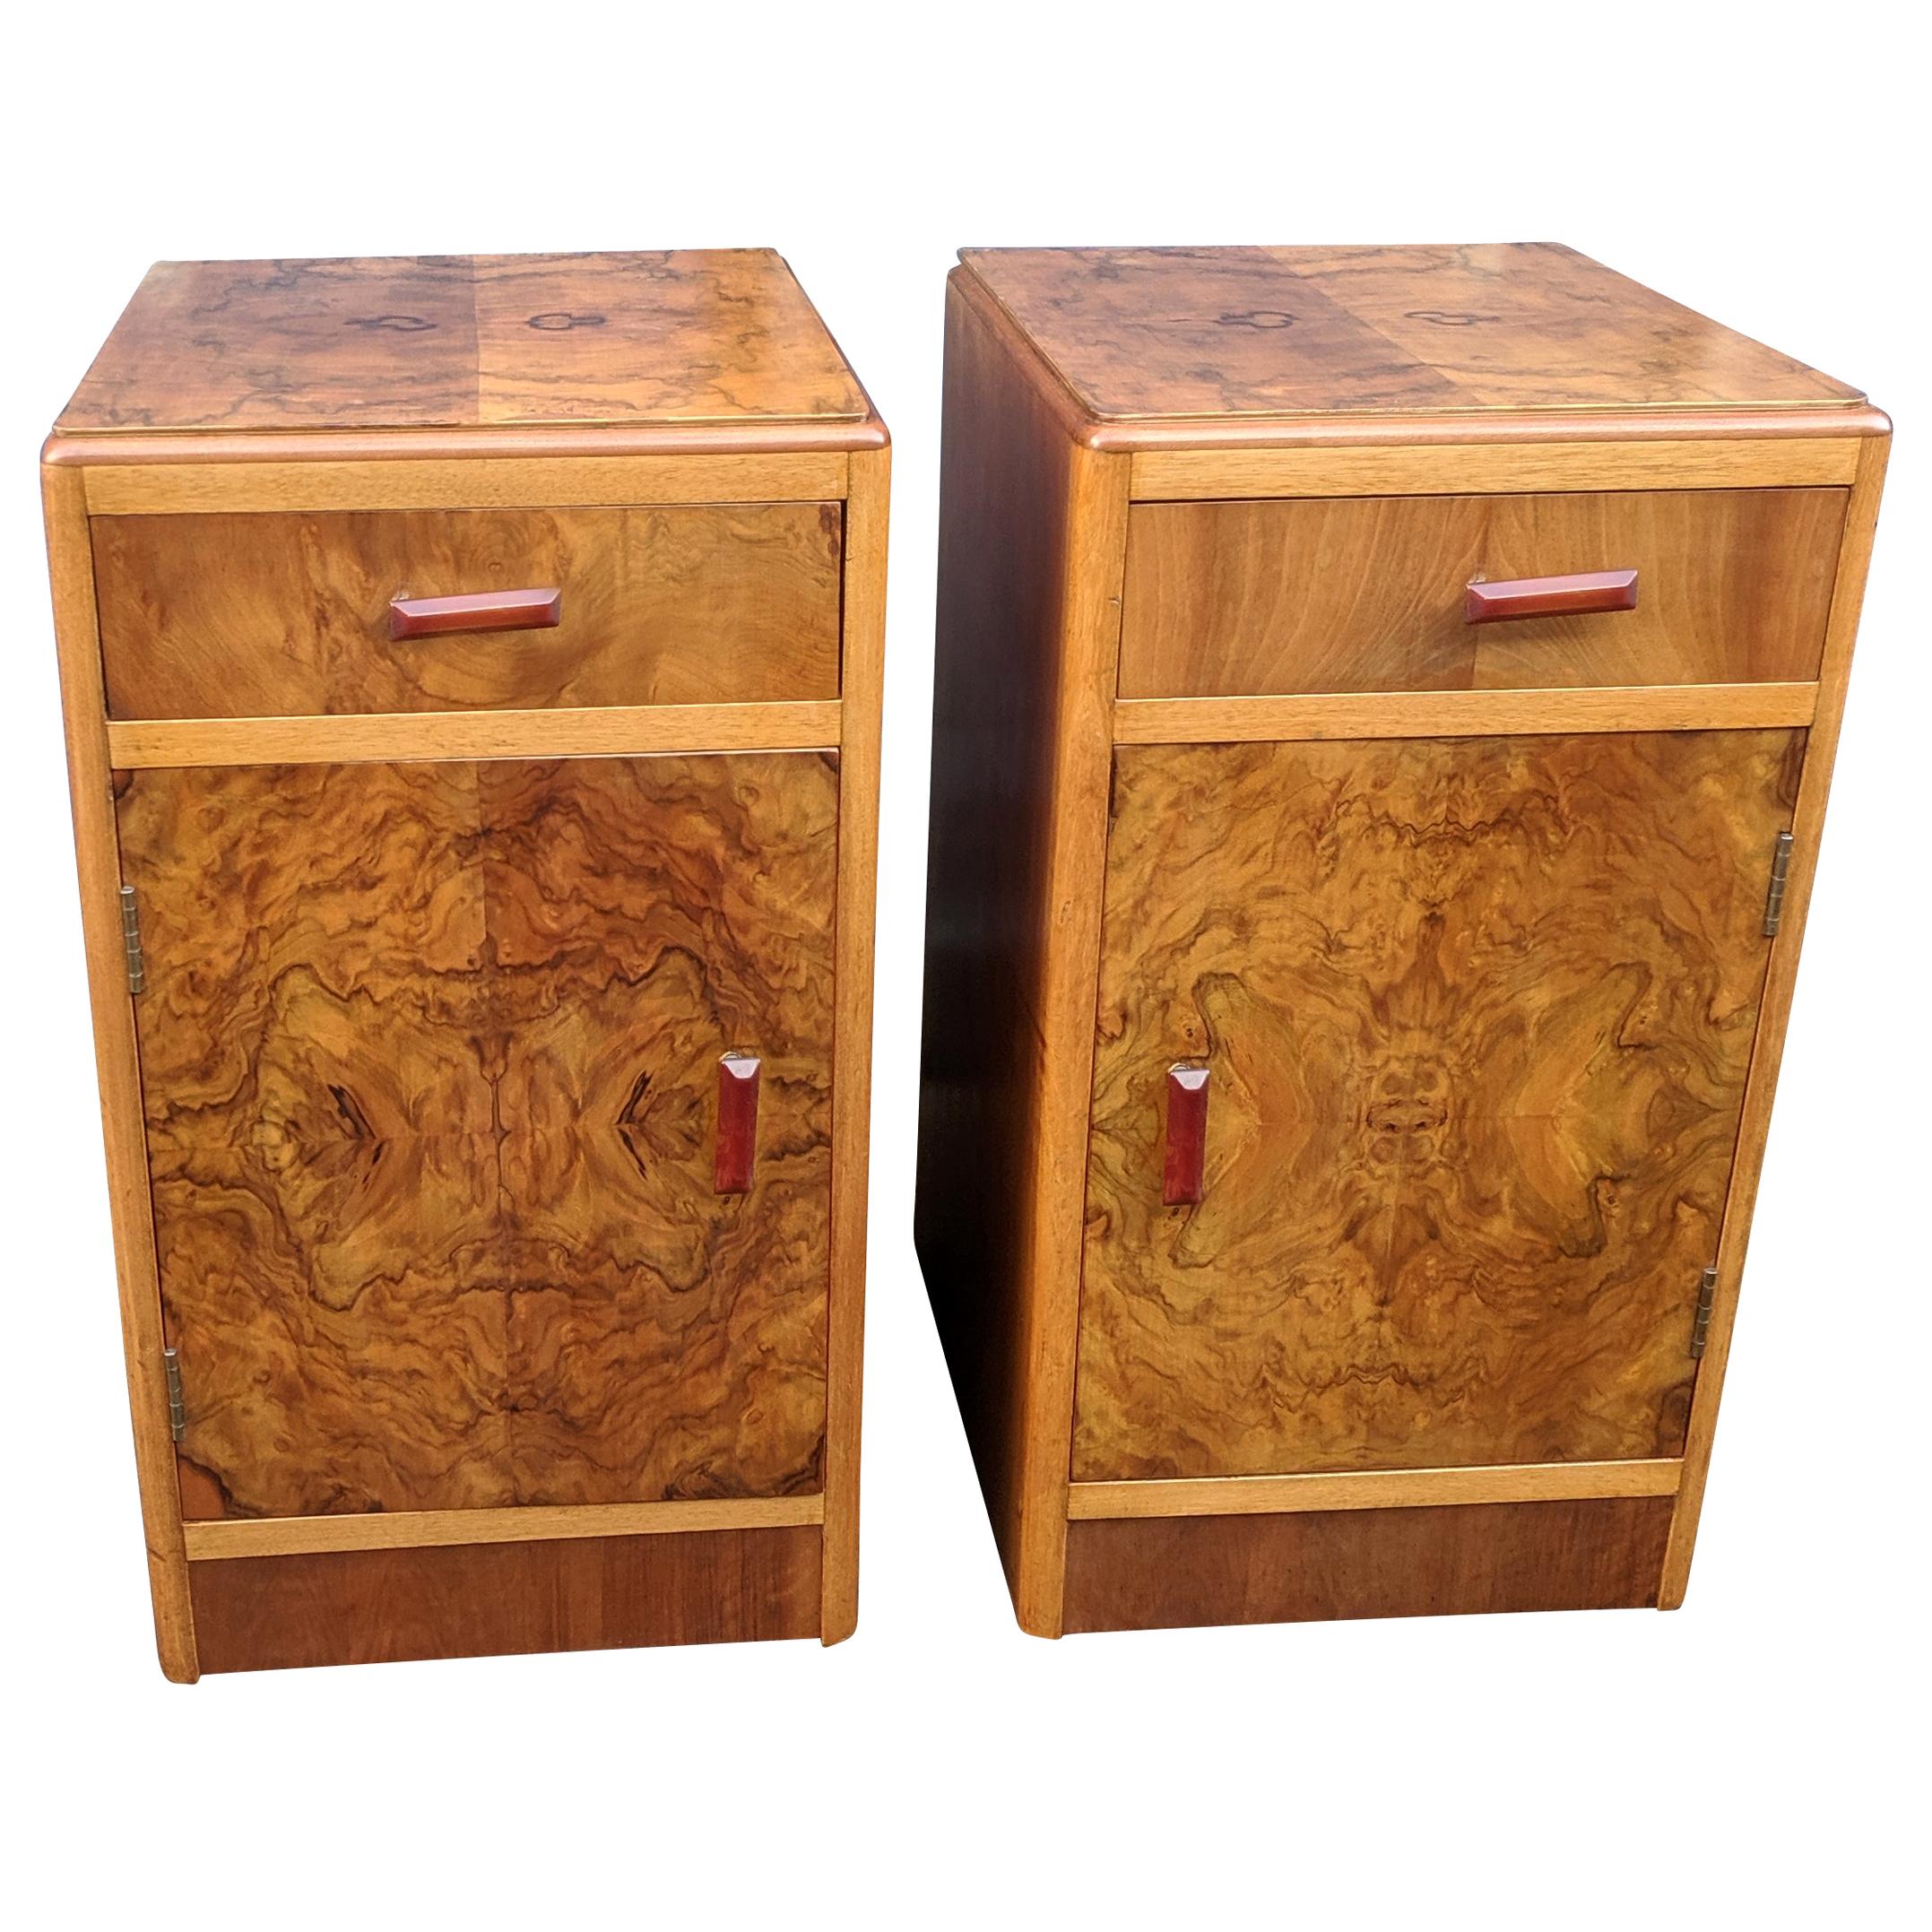 Matching Pair of Art Deco Walnut Bedside Cabinets, circa 1930